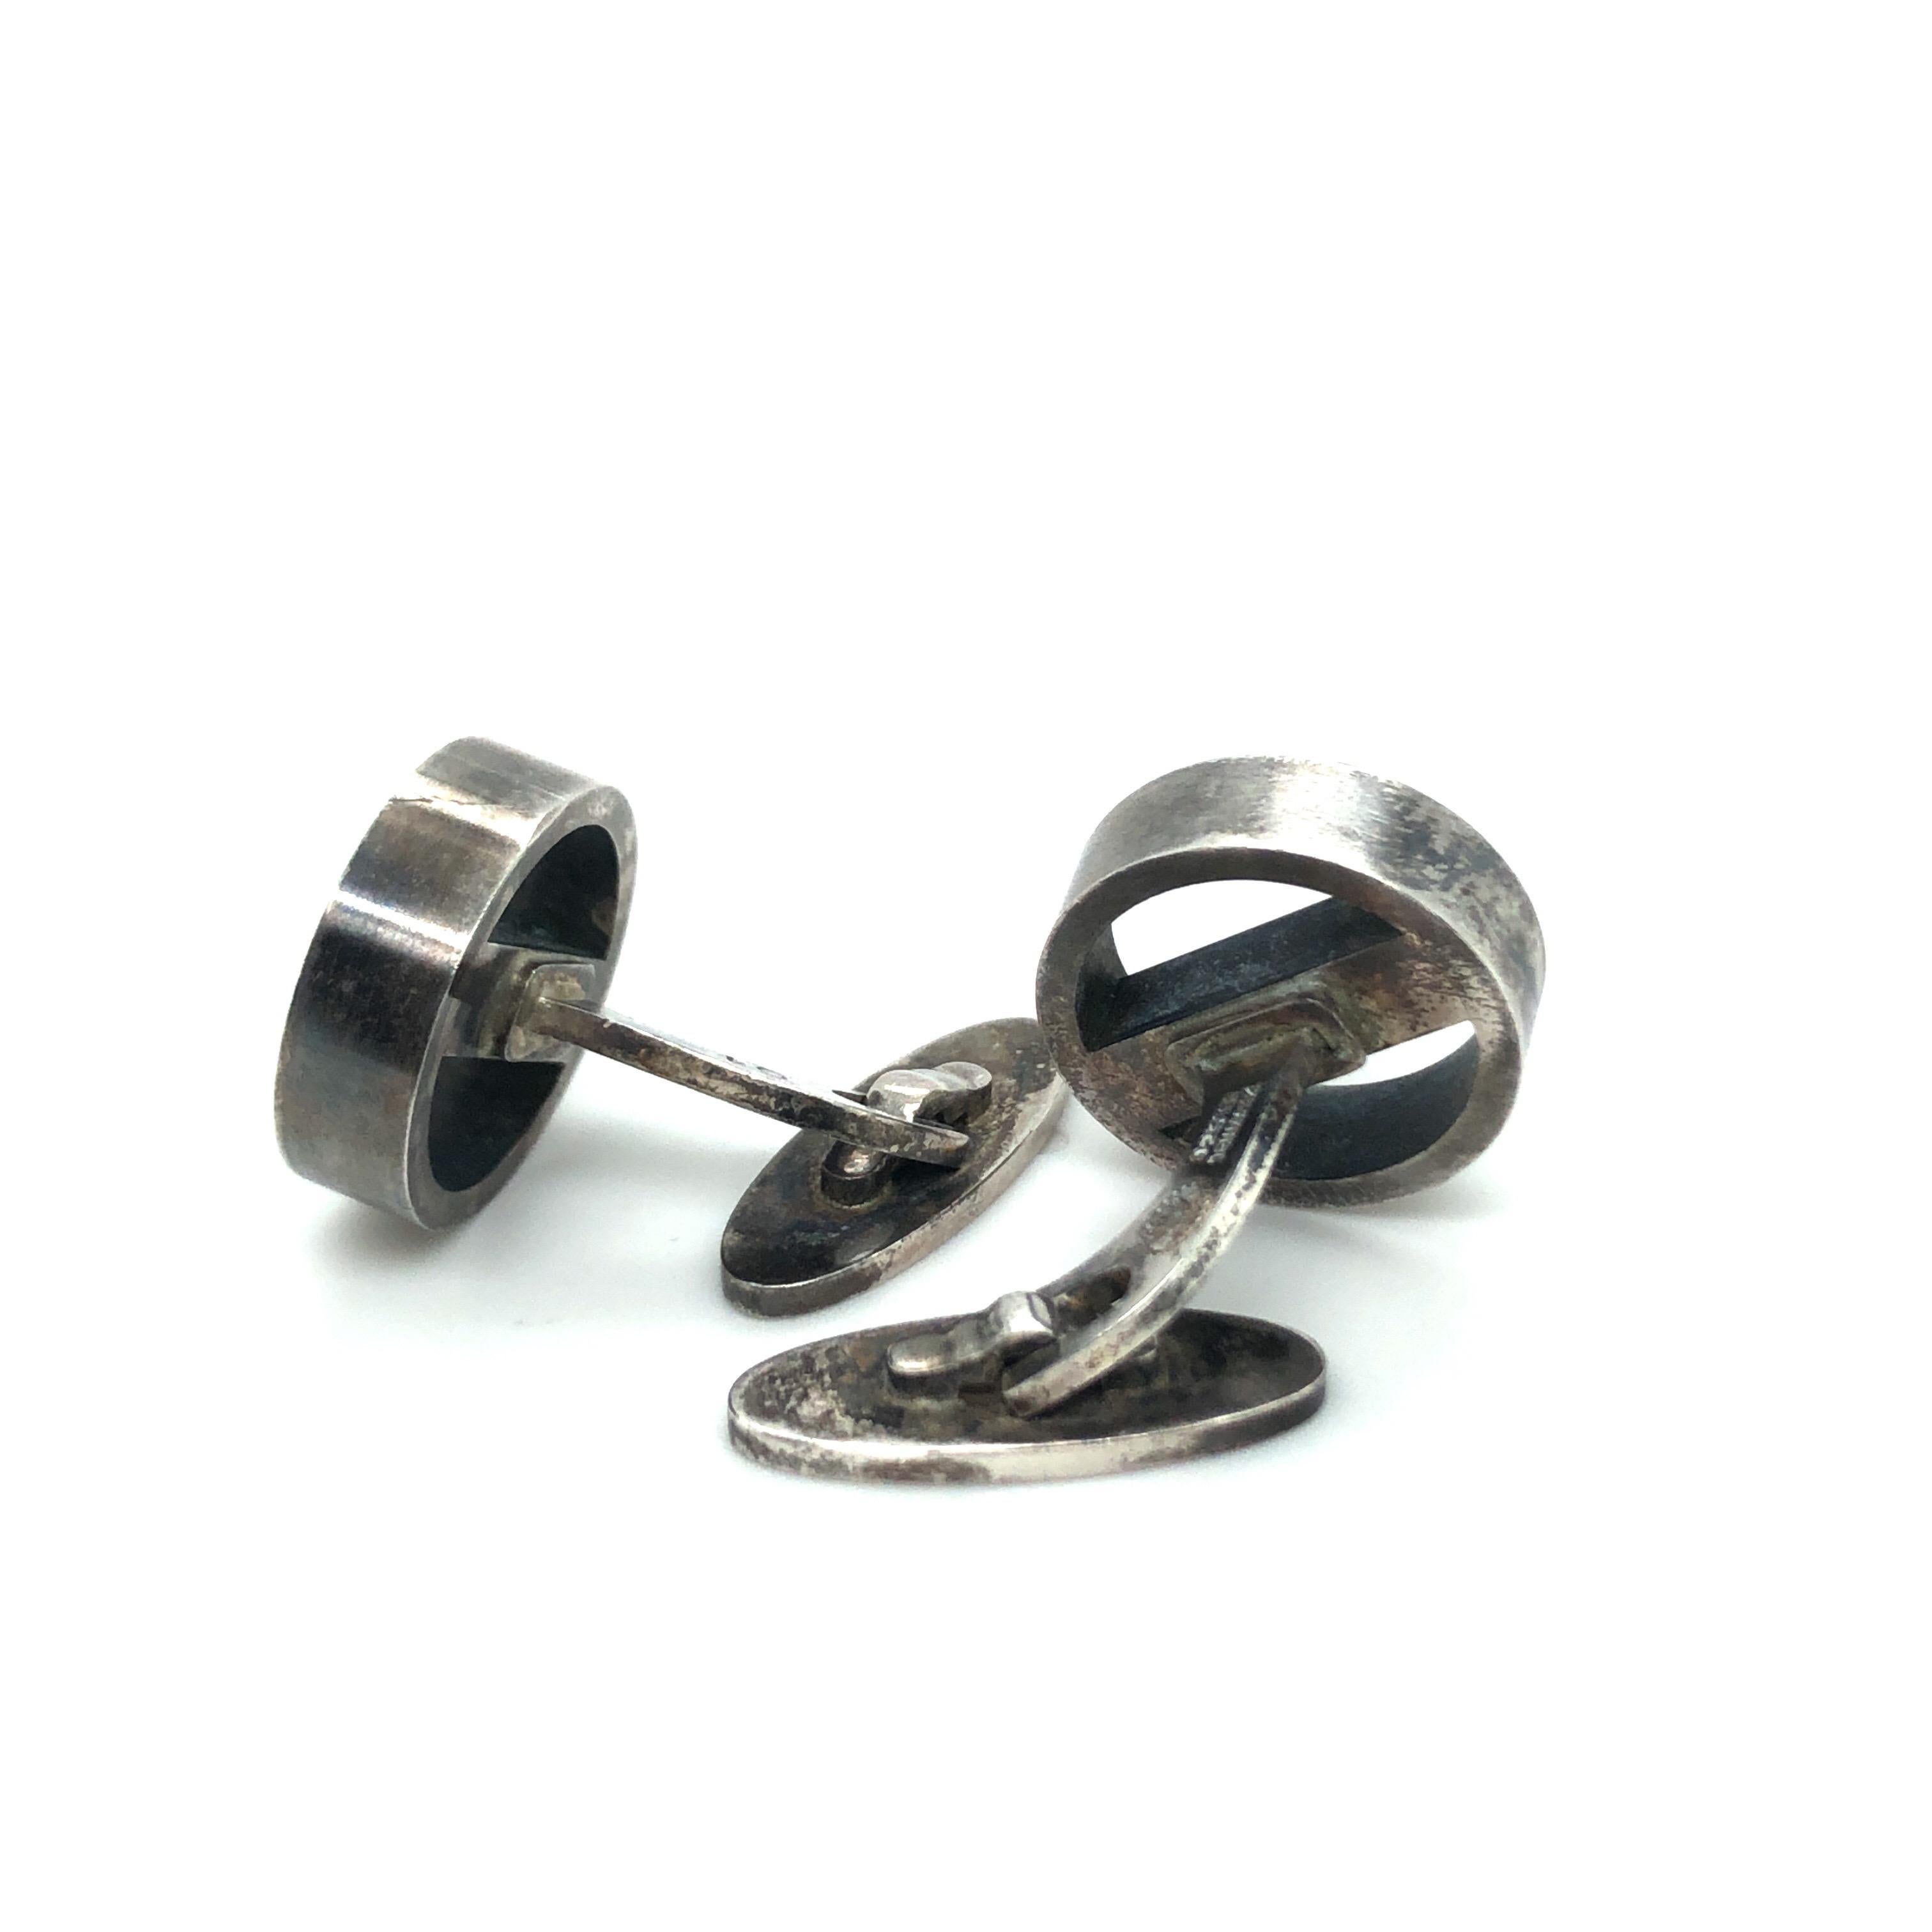 Sterling Silver Cufflinks No. 91 by Georg Jensen.

Stylish whale back cufflinks crafted in 925 Sterling Silver. The face of each cufflink is designed as a wheel crossed by a bar. 
They are in good vintage condition with a wonderful patina which